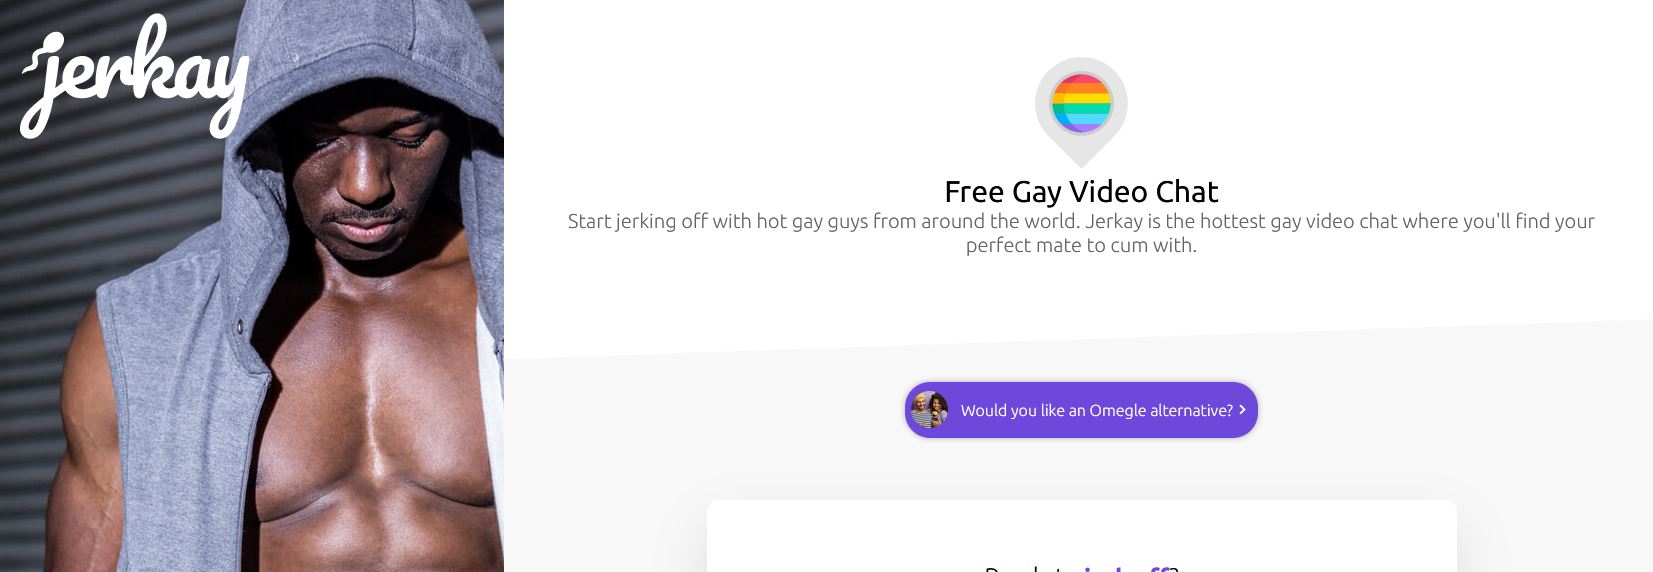 Your guide to online intimacy, evaluating platforms like Jerkay for gay sex chatting